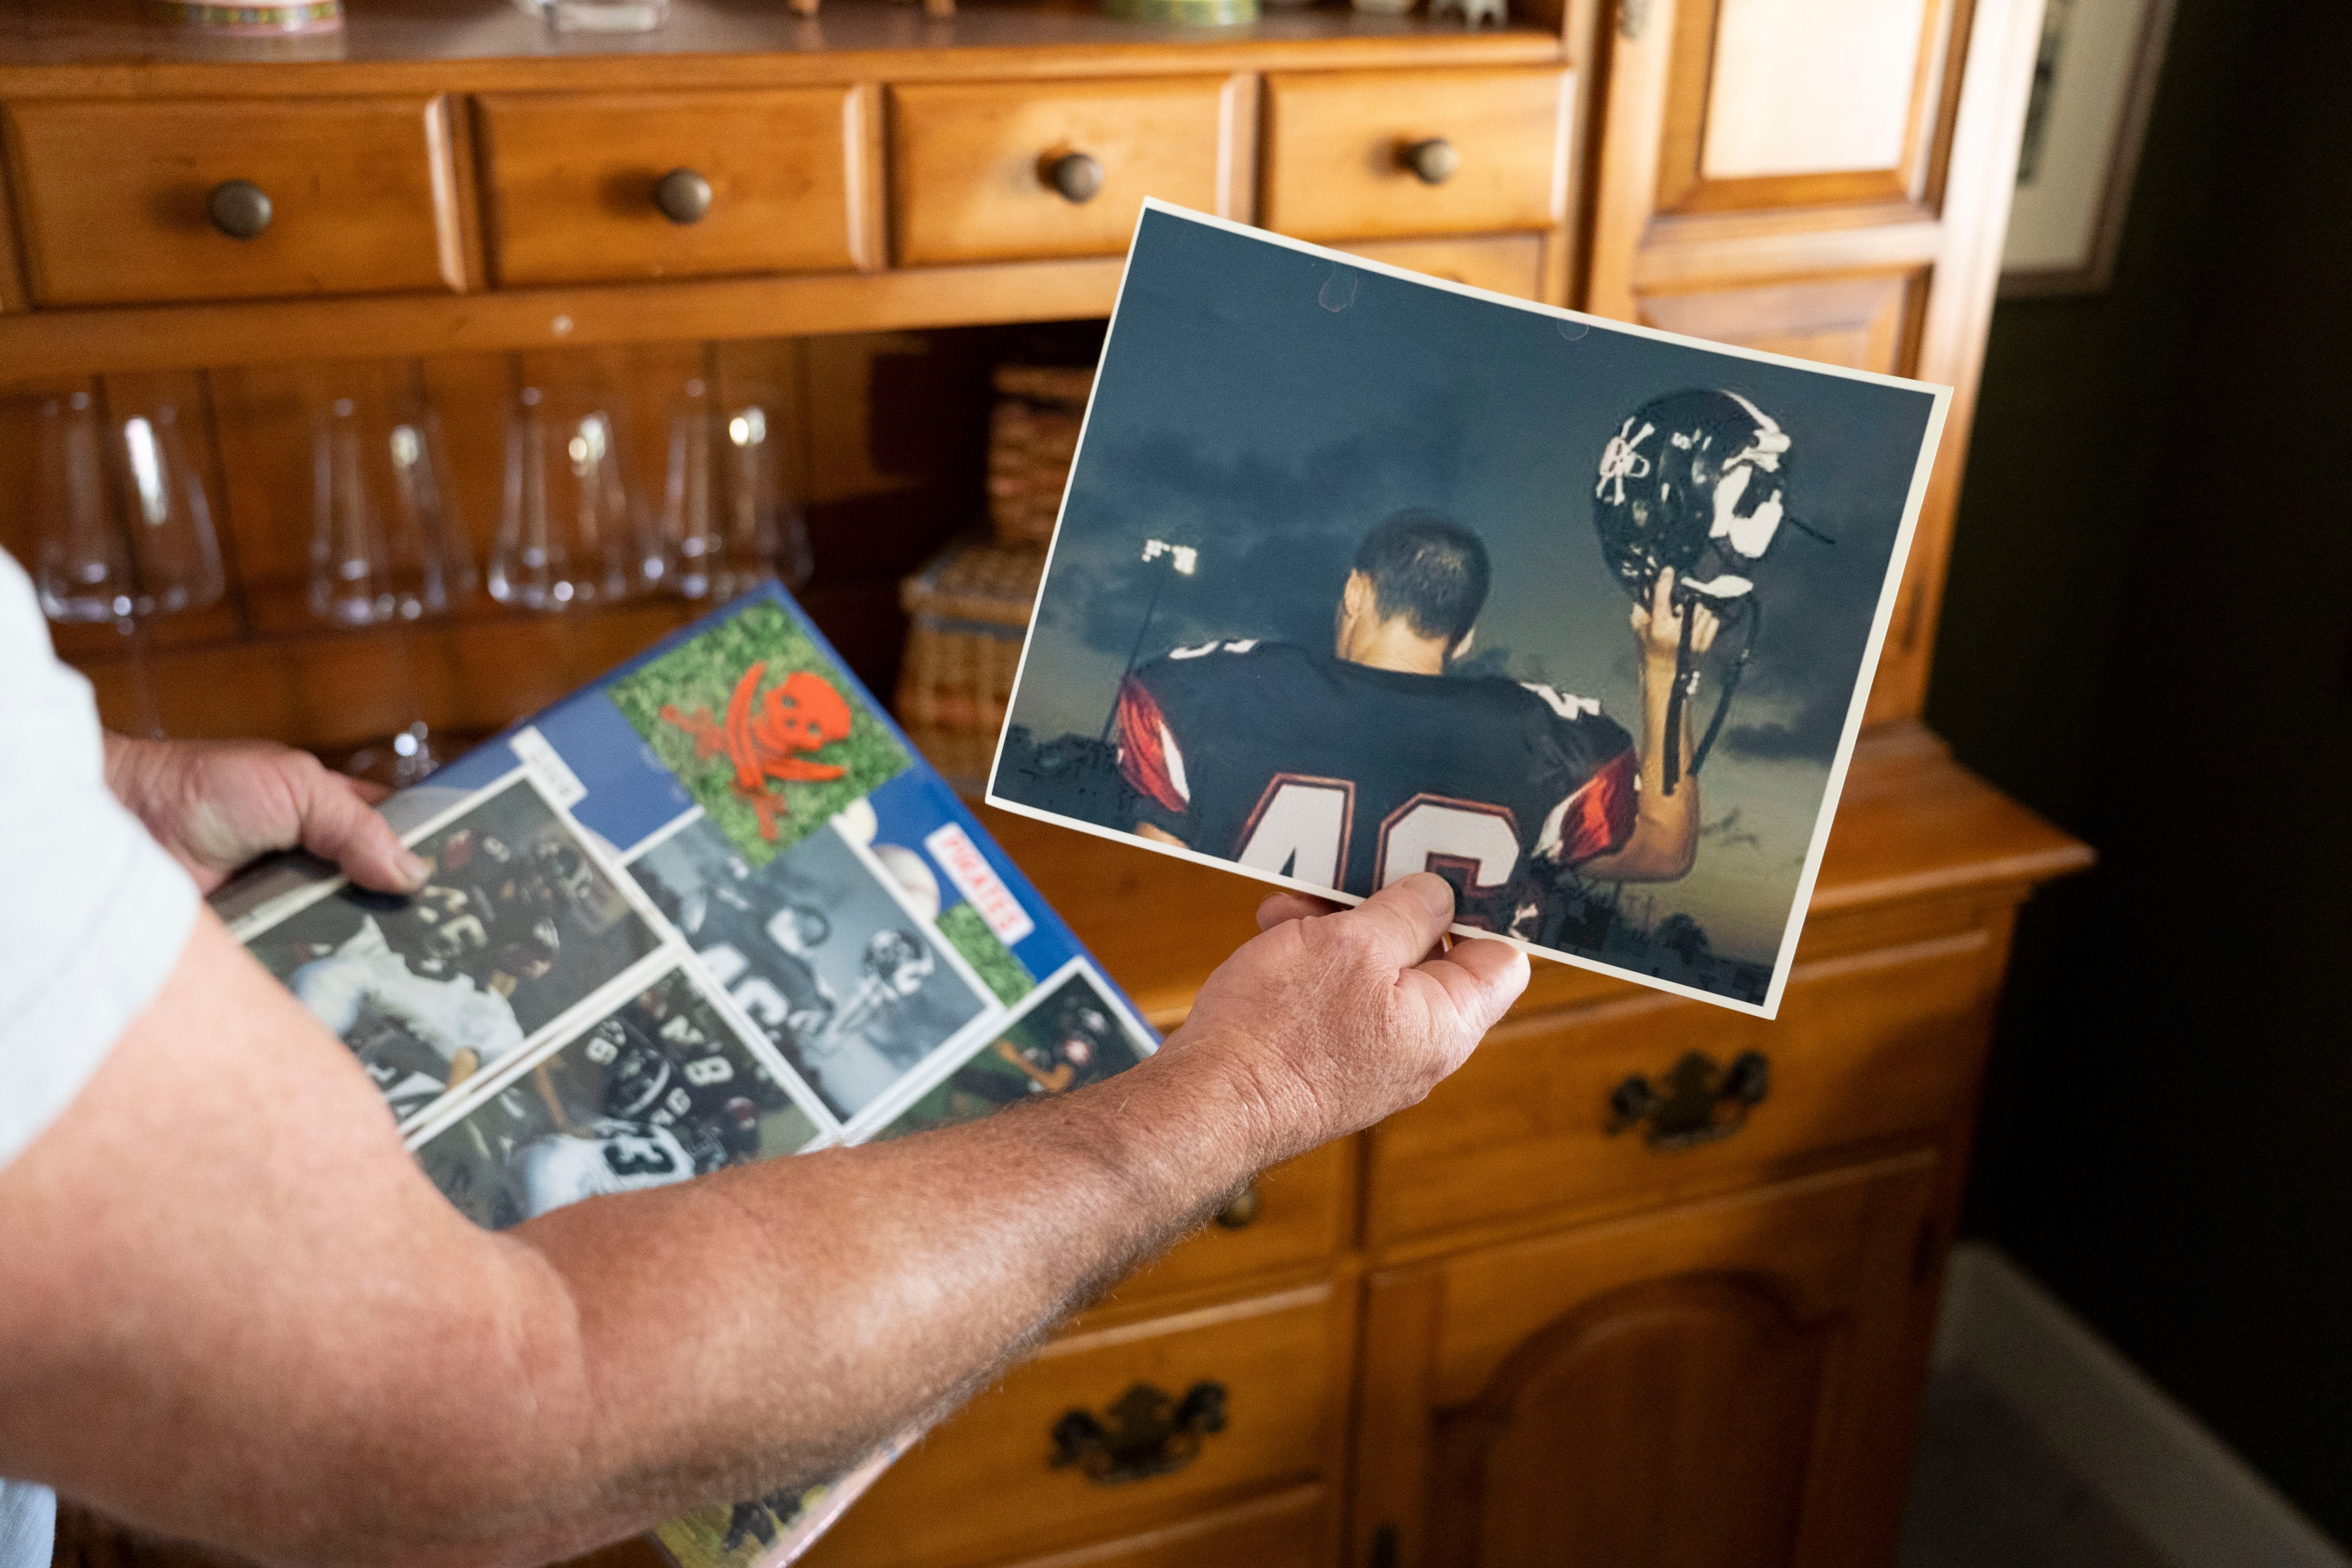 A person holds a photo of a football player (#46) and a scrapbook with sports images on a wooden table.